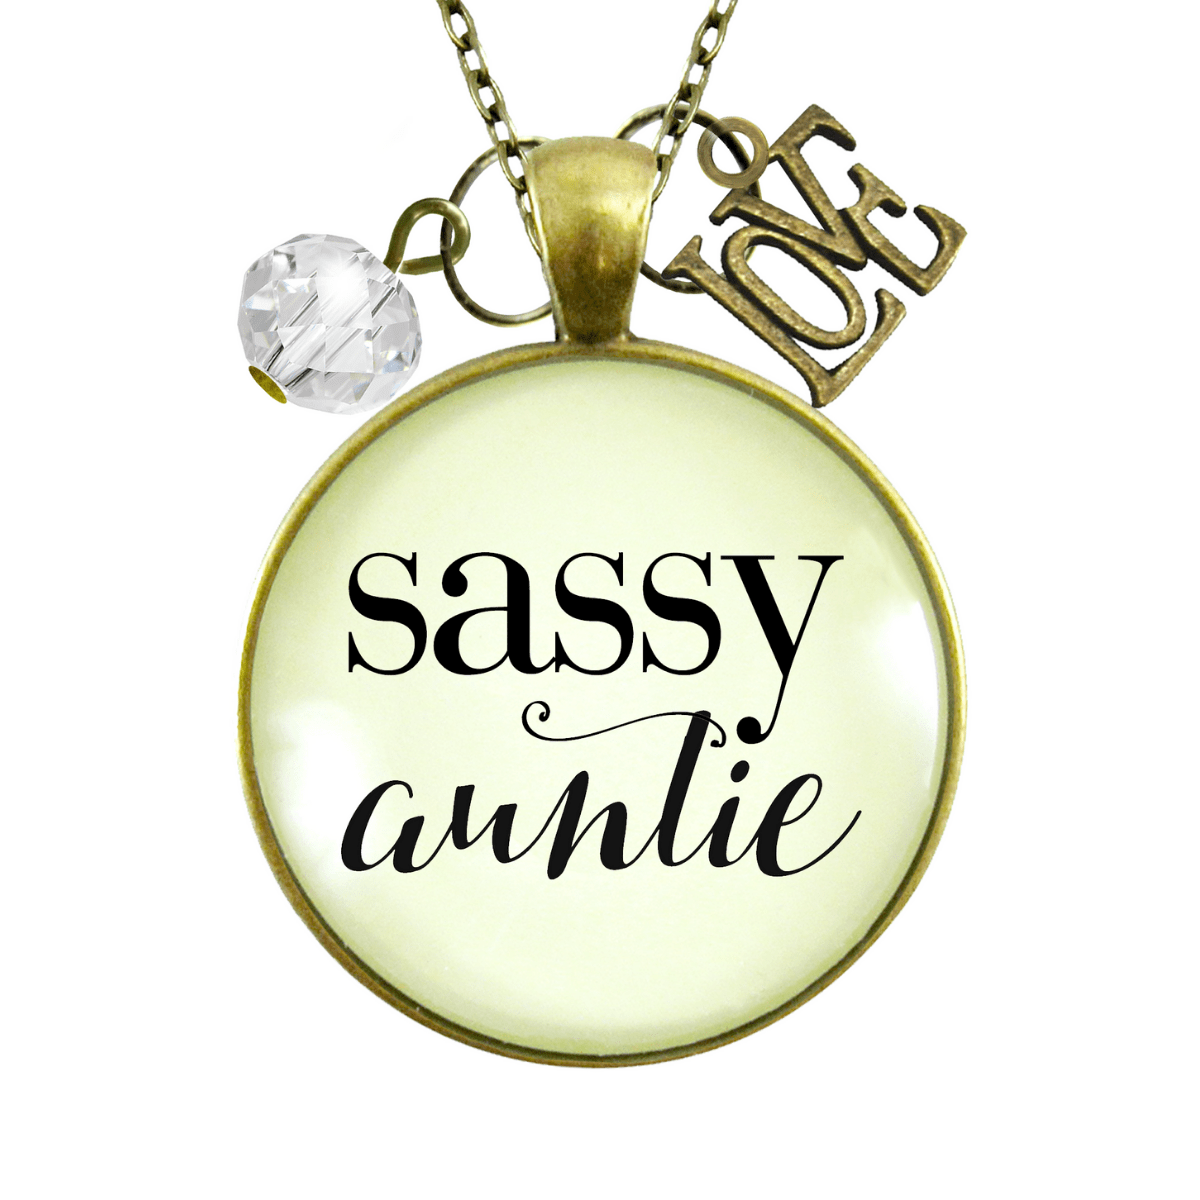 Gutsy Goodness Sassy Auntie Necklace Glam Quote Fun Gift Womens Jewelry Special - Gutsy Goodness Handmade Jewelry;Sassy Auntie Necklace Glam Quote Fun Gift Womens Jewelry Special - Gutsy Goodness Handmade Jewelry Gifts